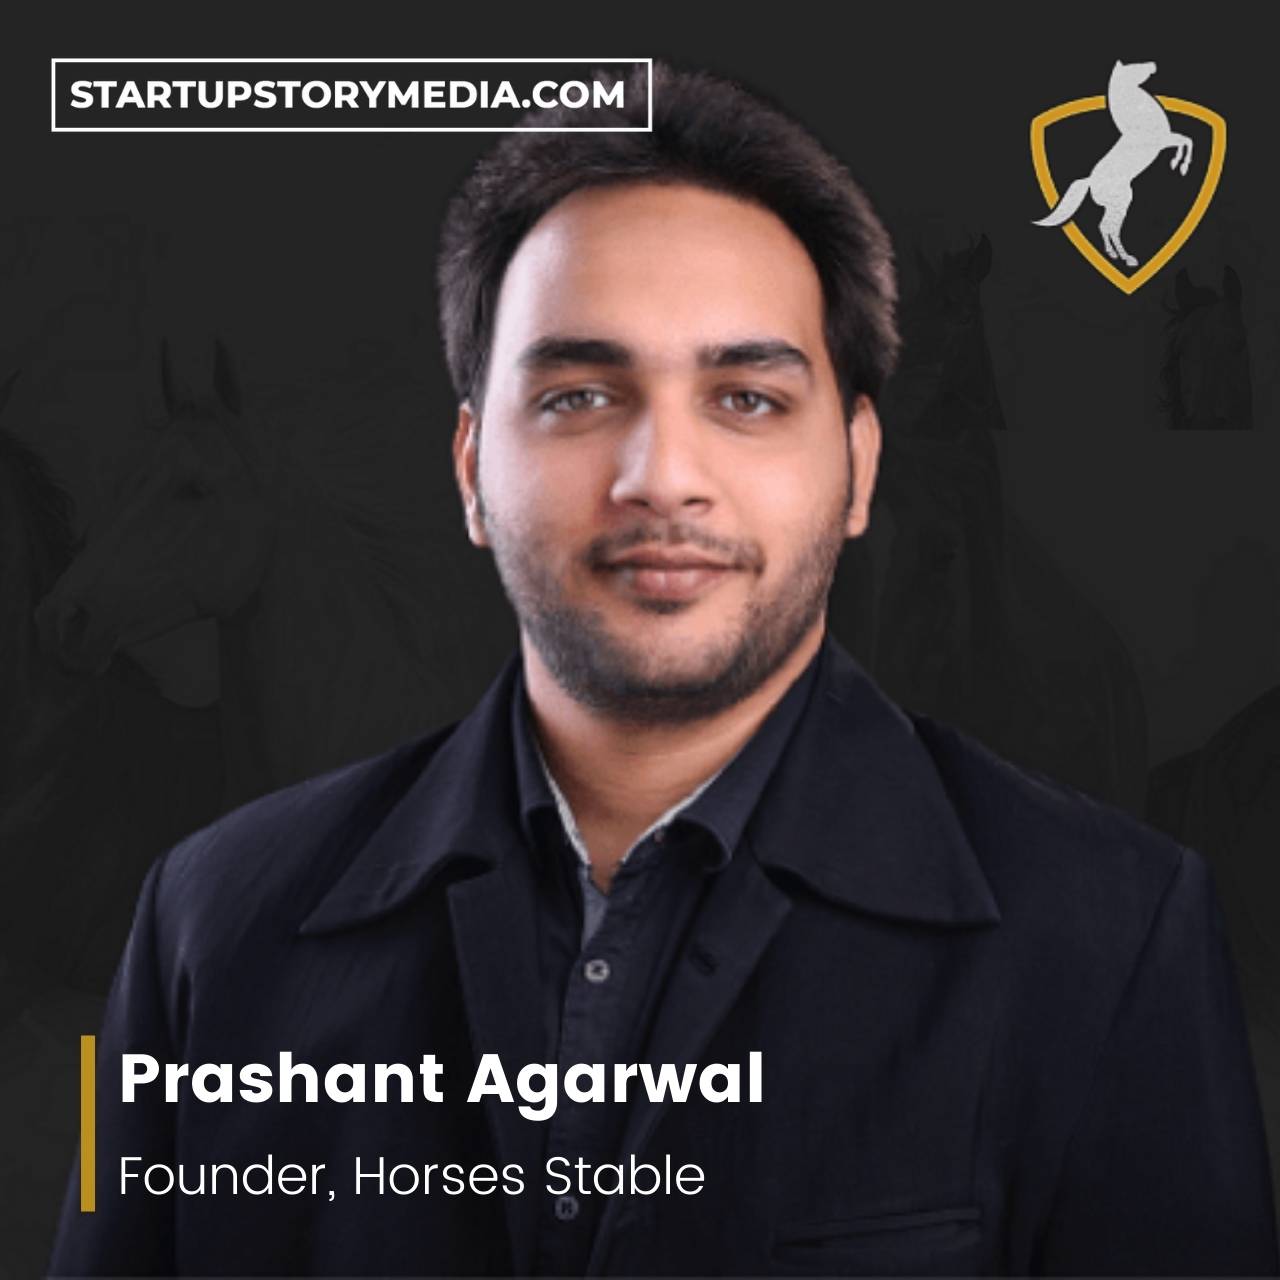 Prashant founded Horses stable in India to bring entrepreneurs' ideas to life,